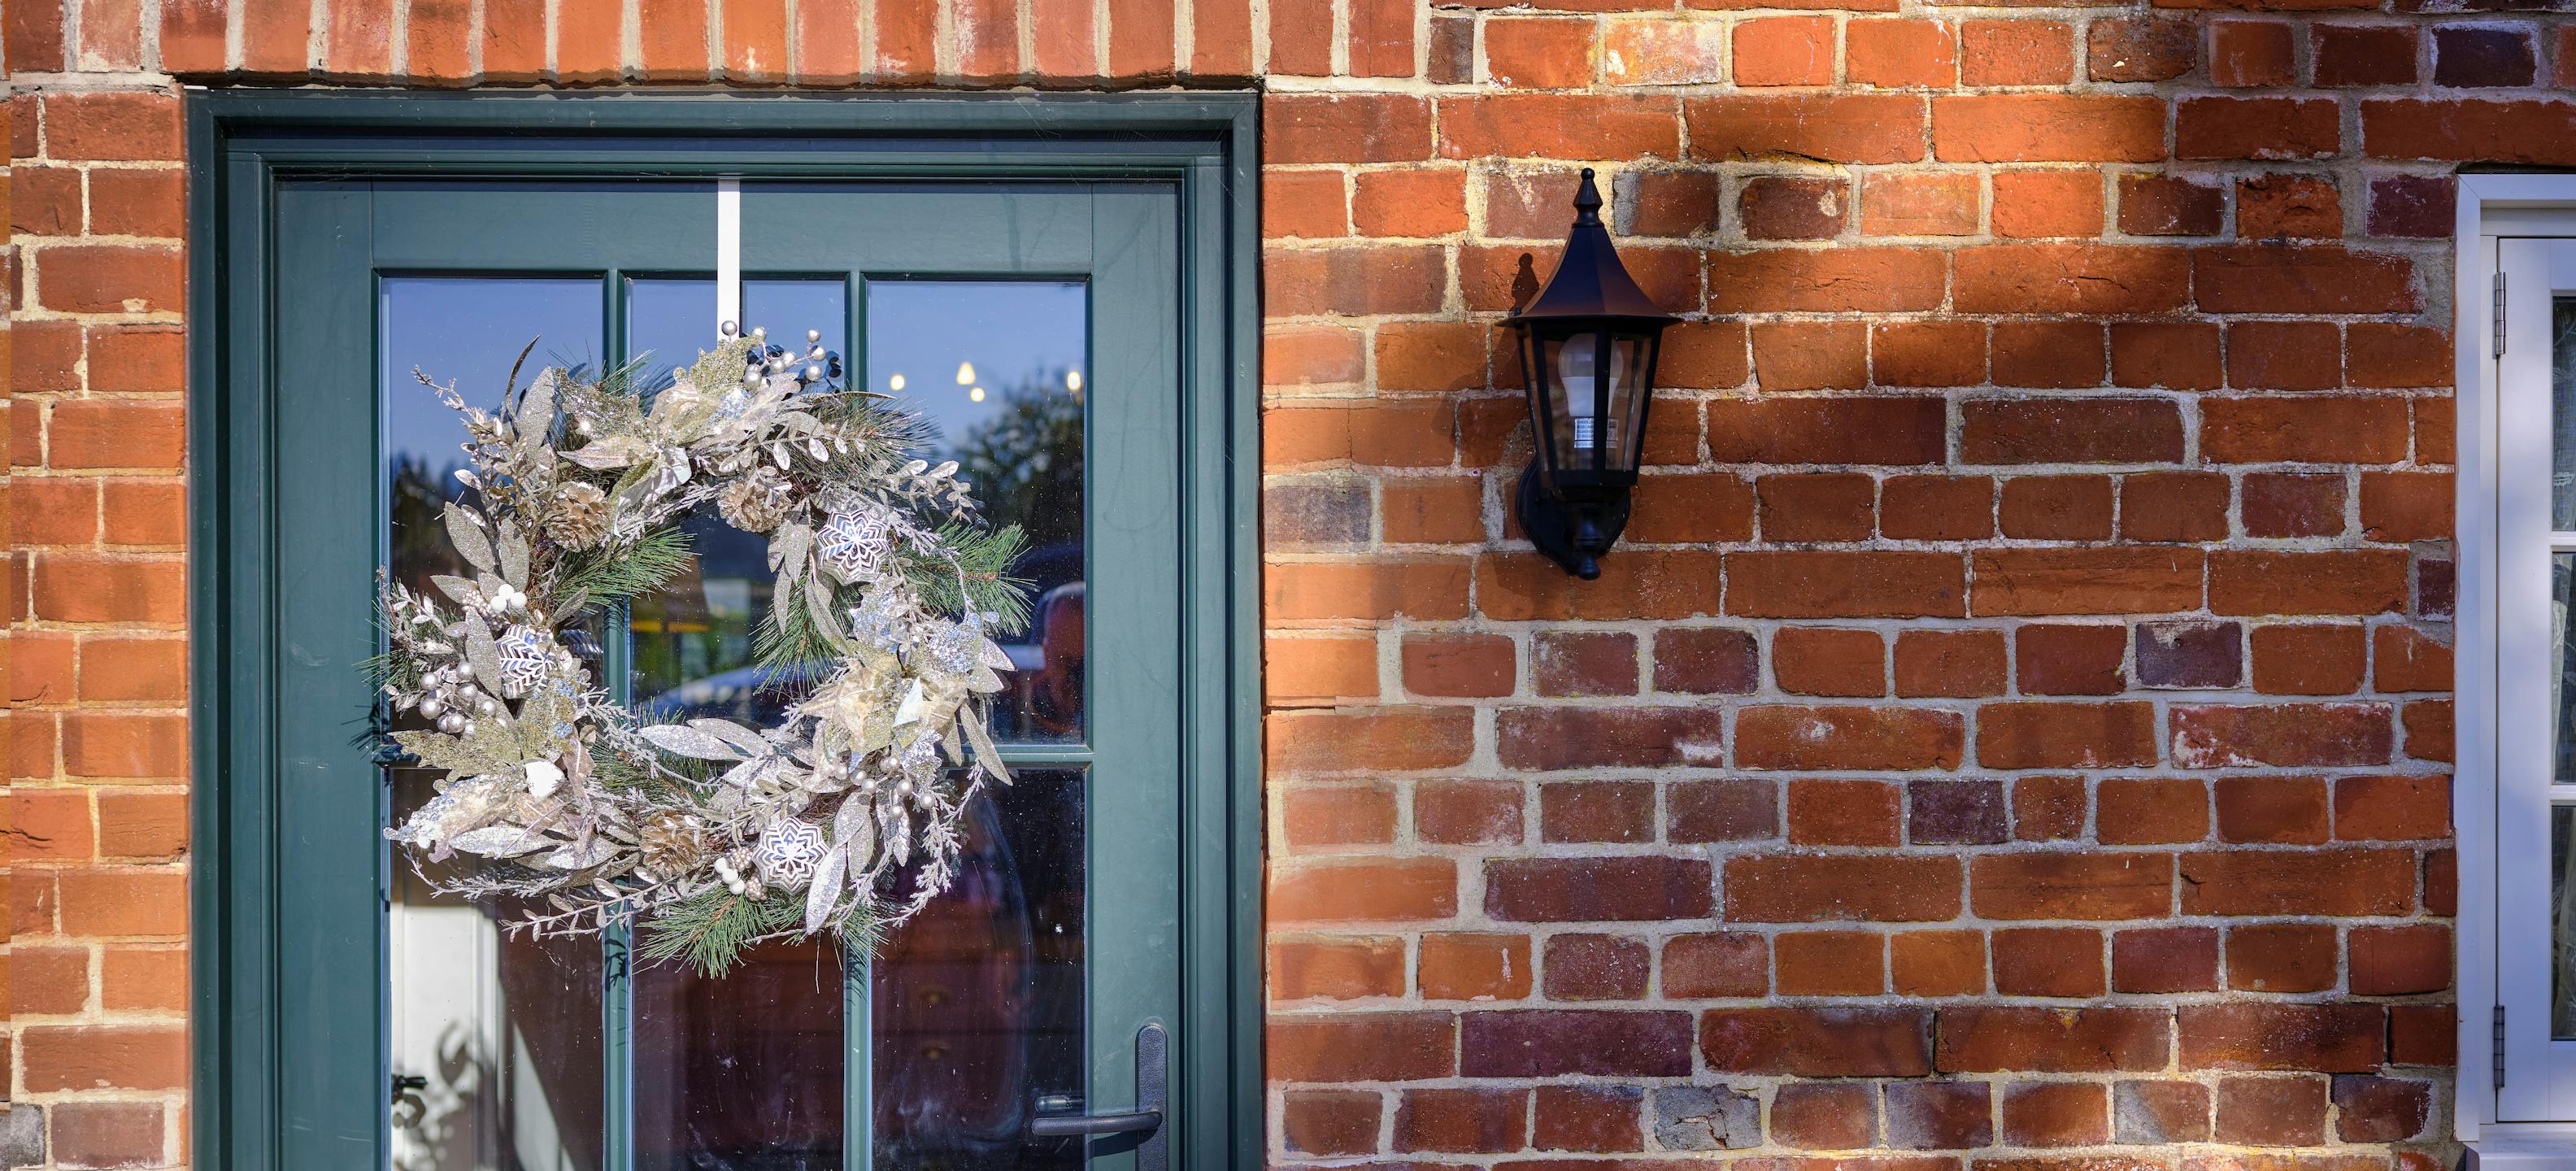 Glittery Christmas wreath hanging on green door on red brick house